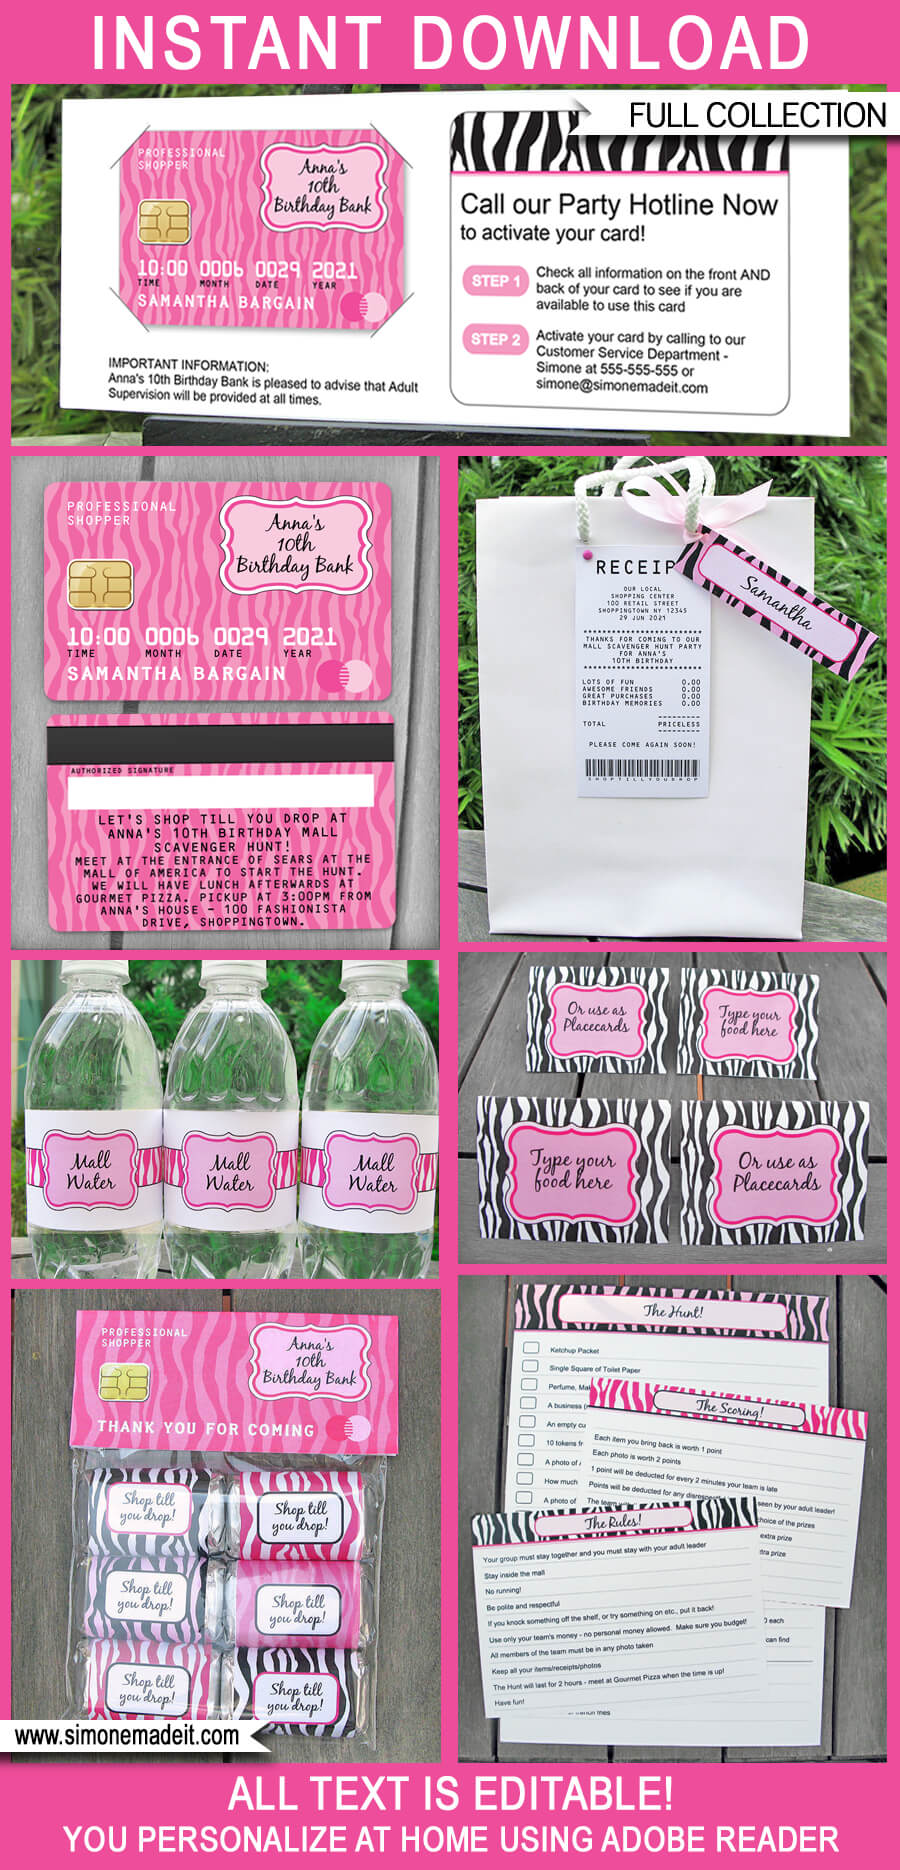 Mall Scavenger Hunt Party Printables, Invitations & Decorations | Shopping Party | Credit Card Invitation |  Editable Birthday Party Theme Templates | INSTANT DOWNLOAD $12.50 via SIMONEmadeit.com